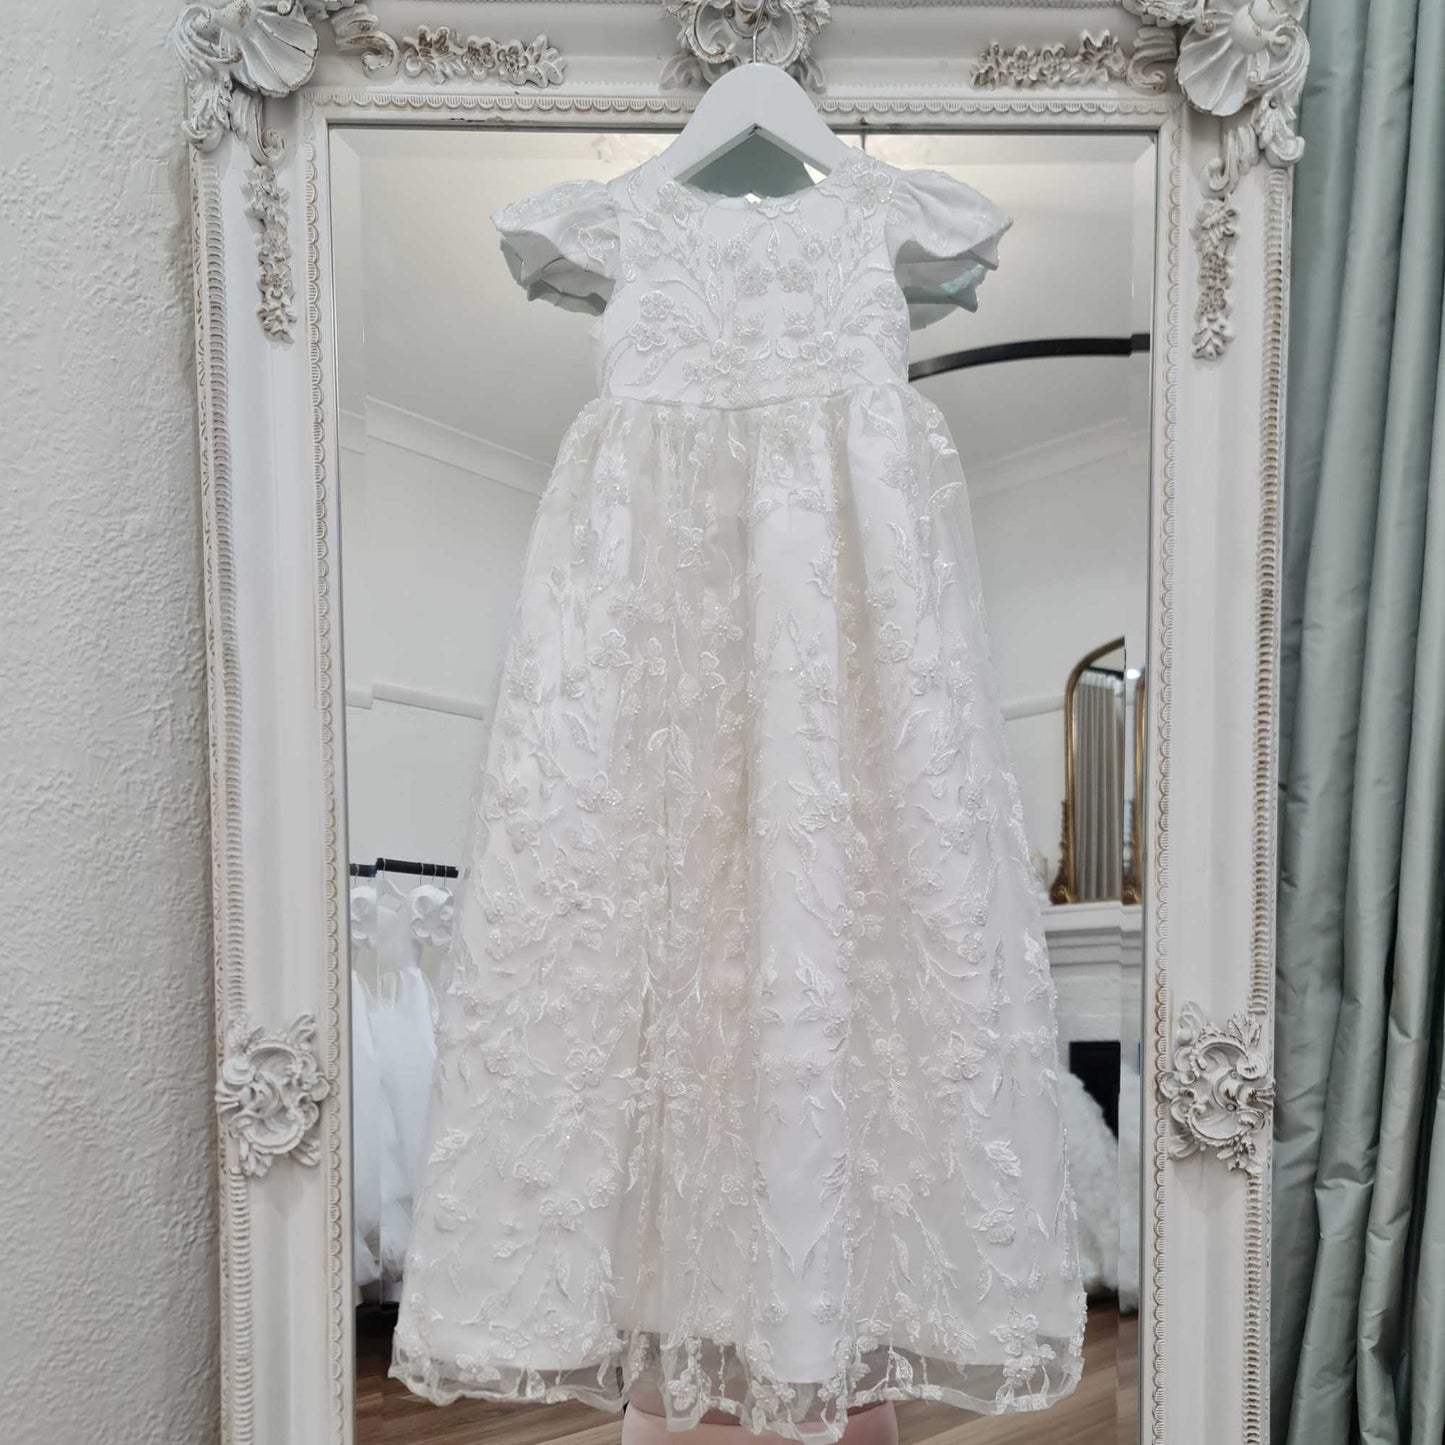 Premium Photo | Shot of a beautiful christening gown